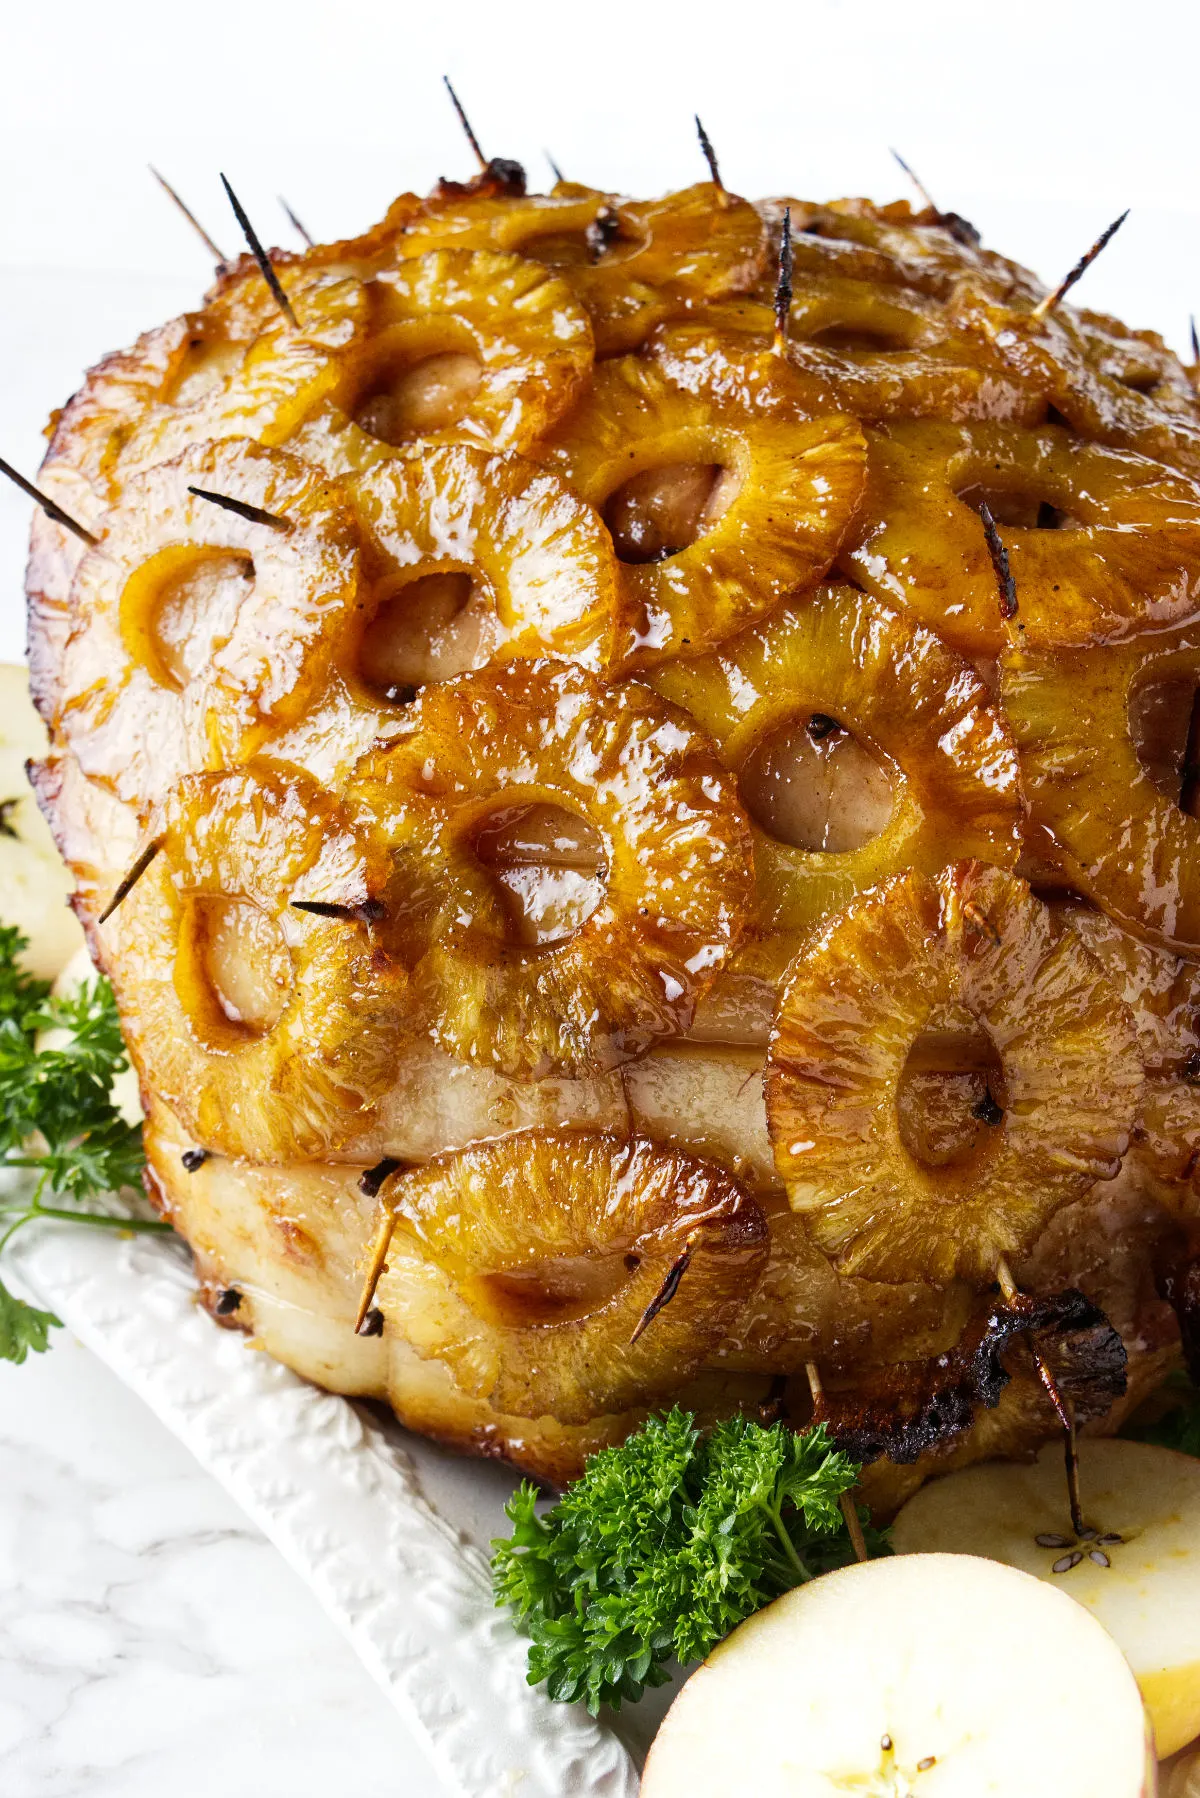 A smoked ham with pineapple rings and glaze.